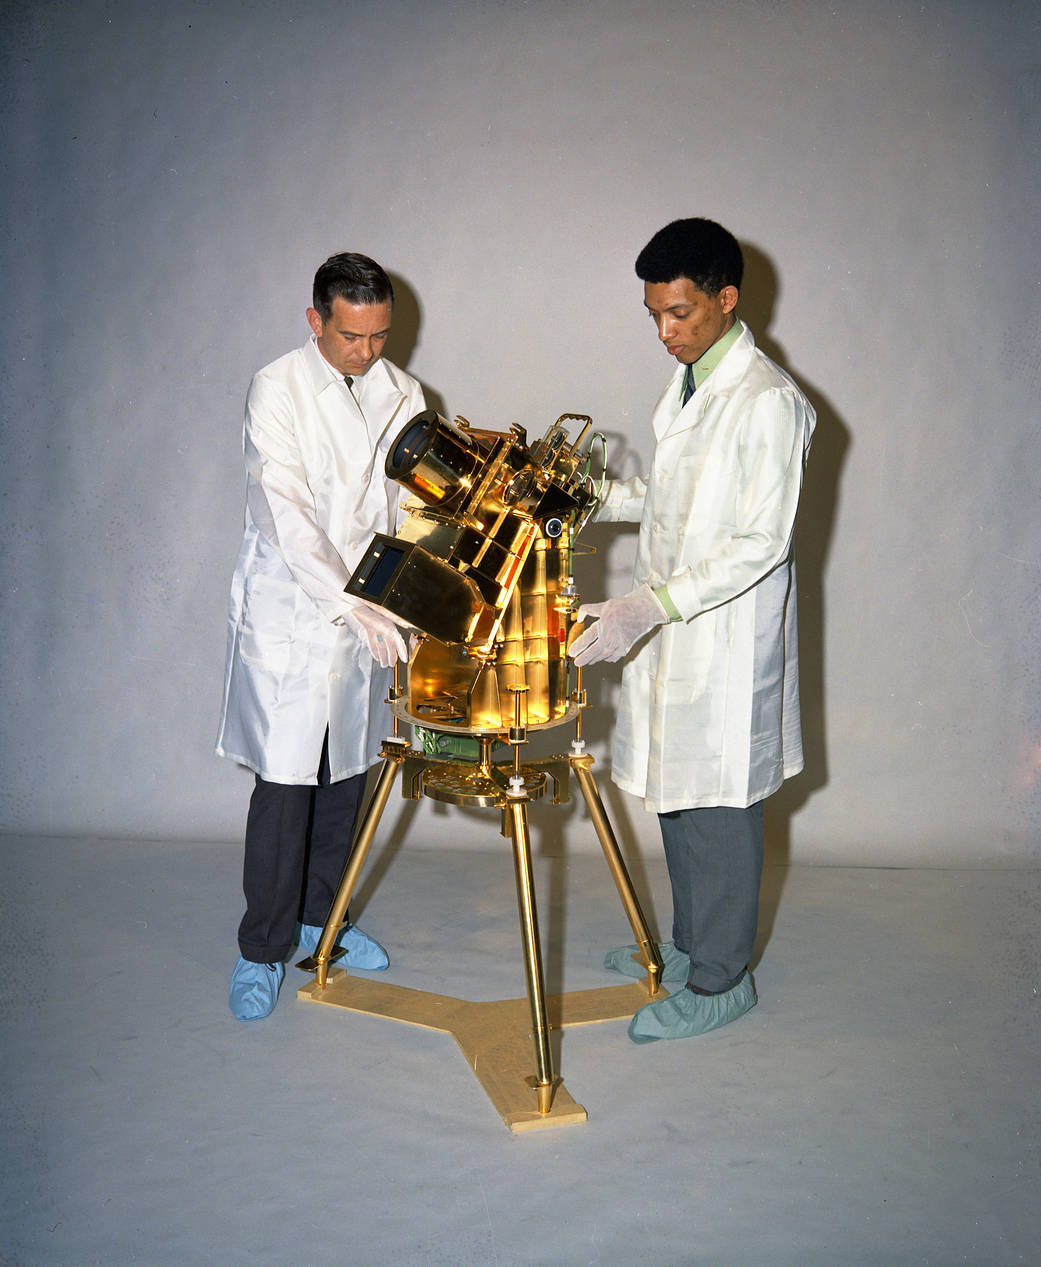 Dr. George Carruthers at right and William Conway with small gold-plated science instrument on tripod